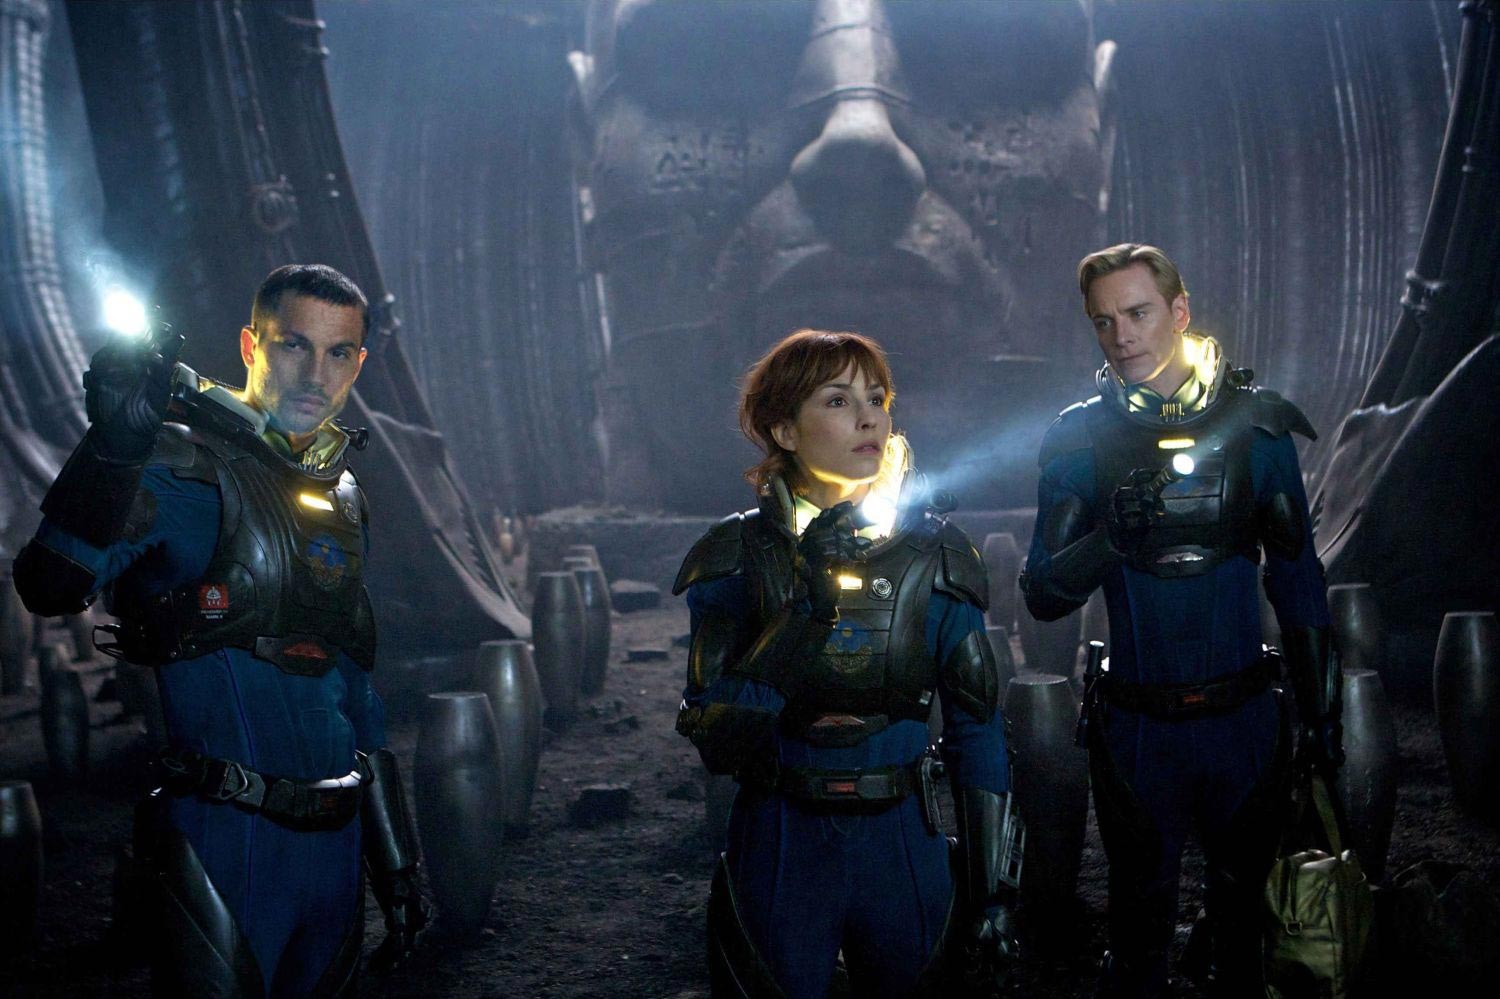 Logan Marshall-Green, Noomi Rapace and Michael Fassbender in 20th Century Fox's Prometheus (2012)